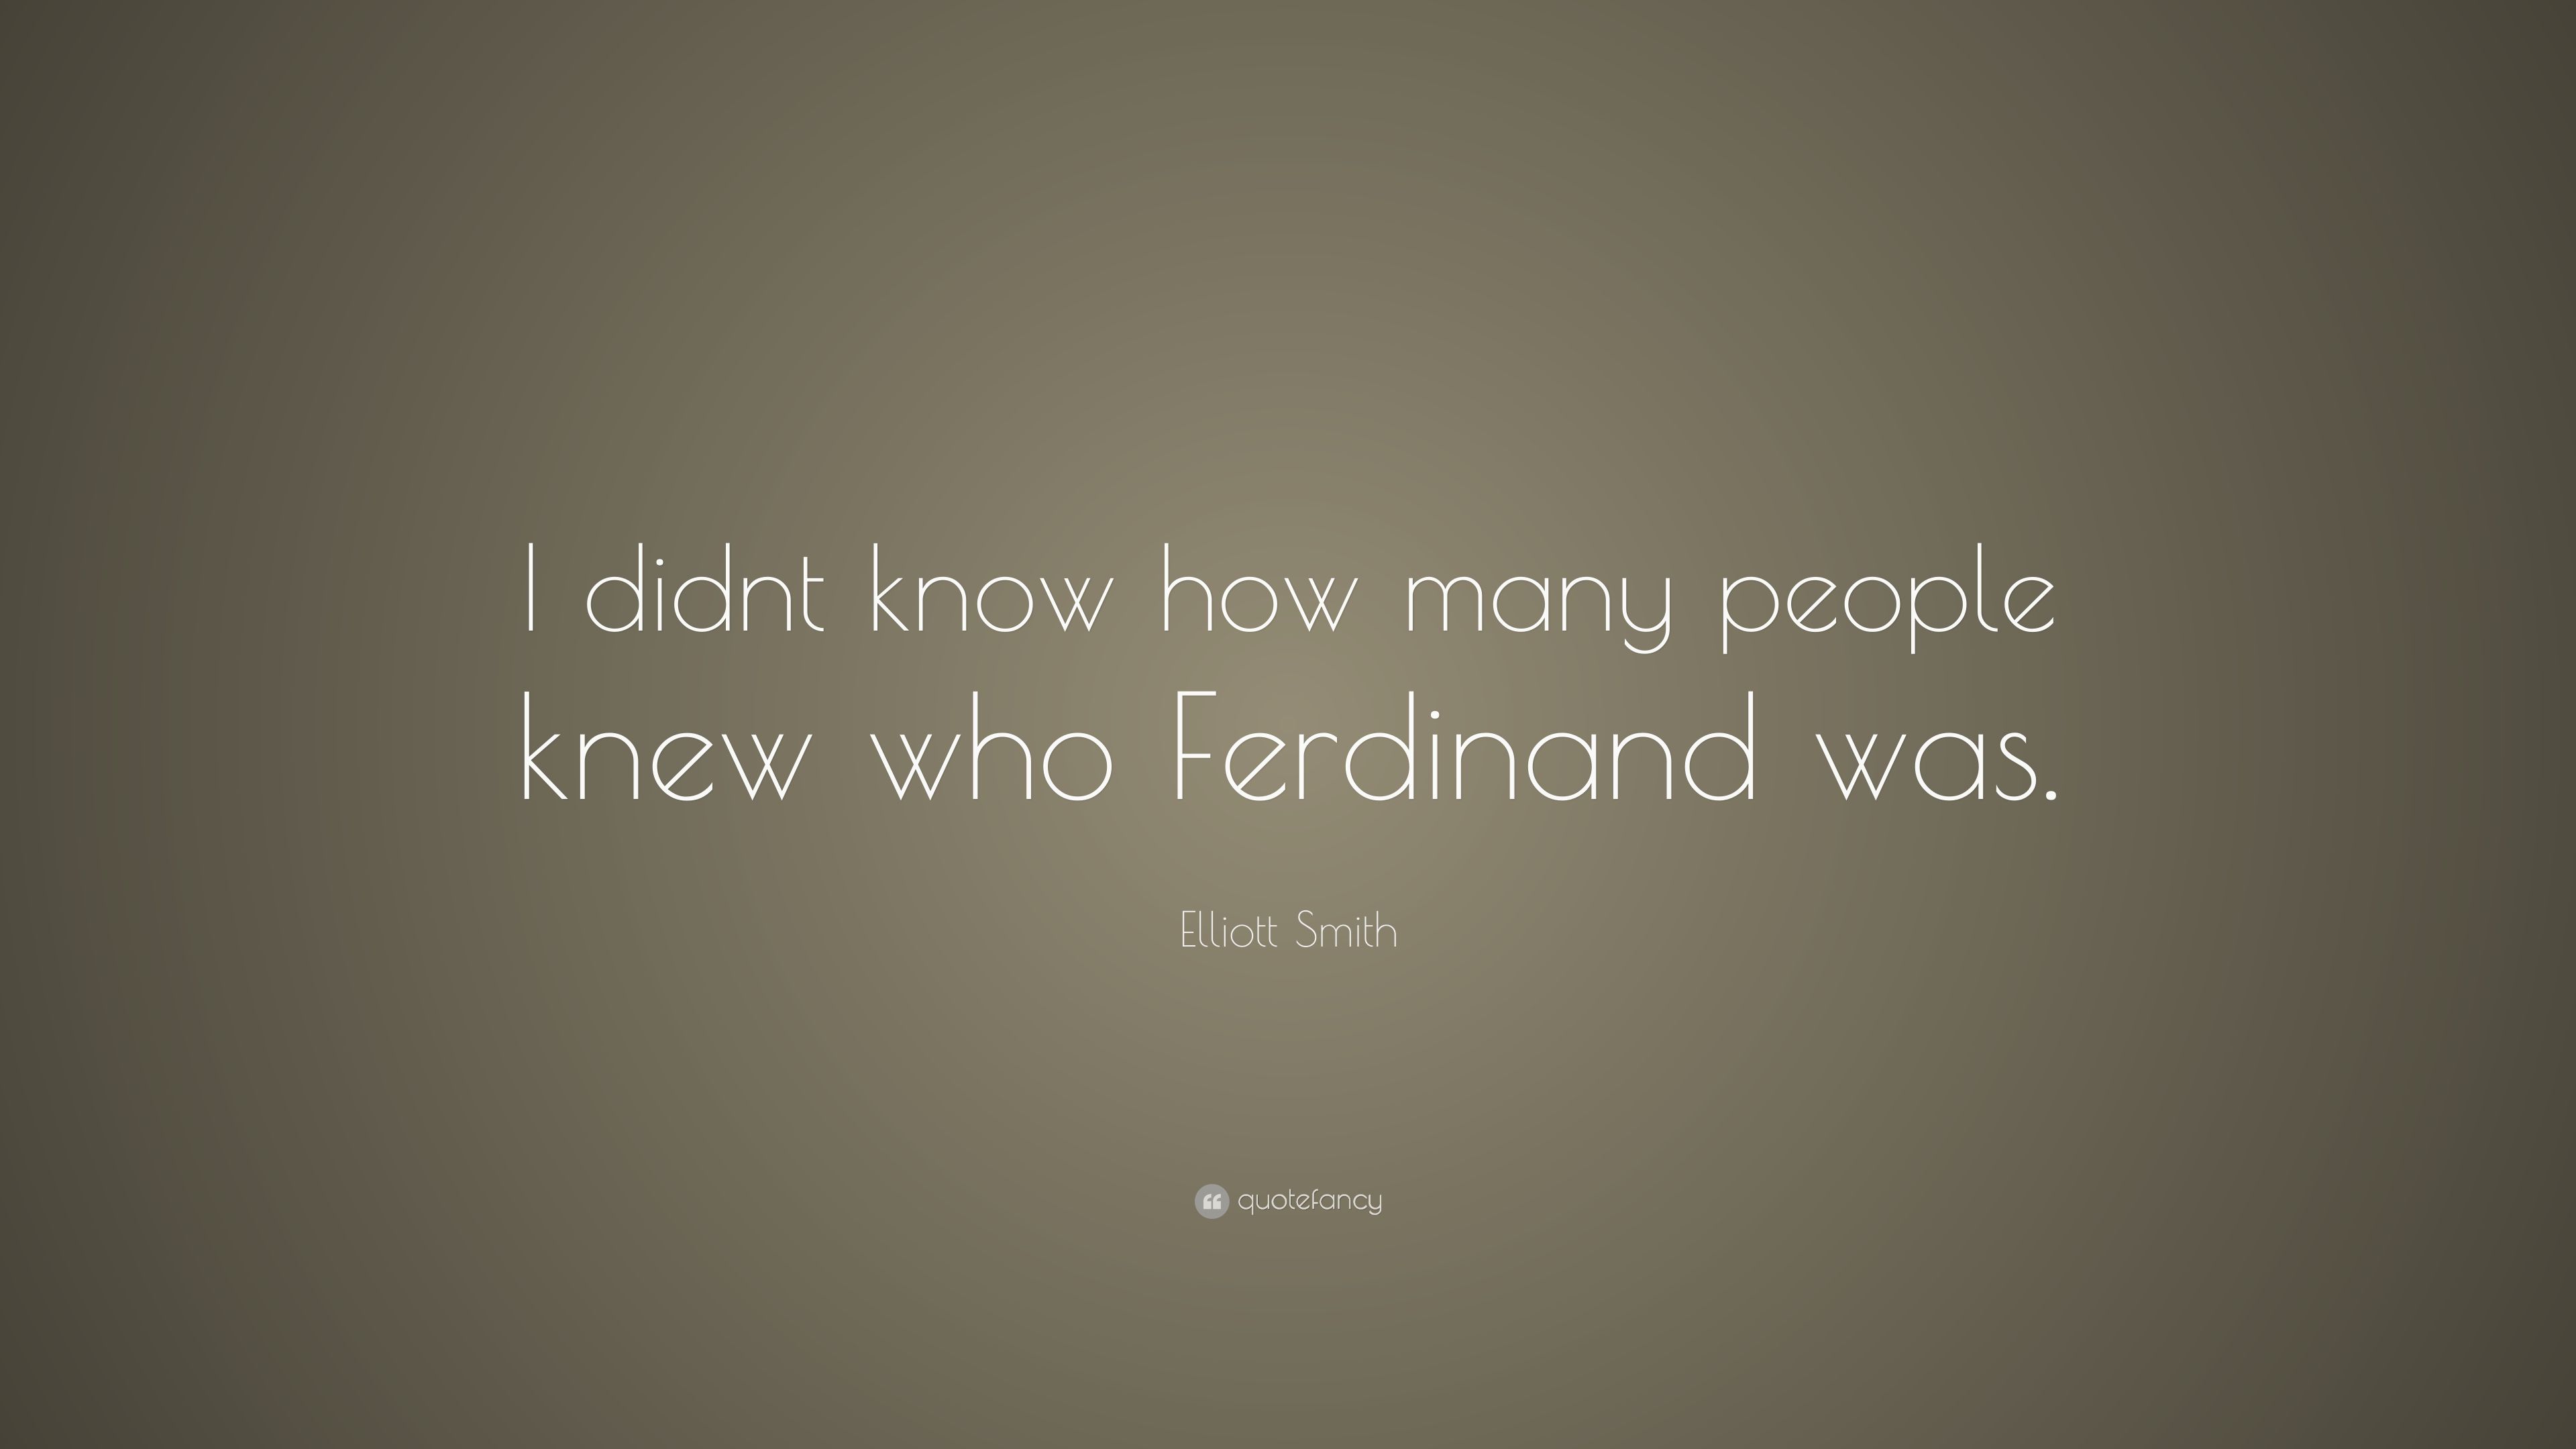 Elliott Smith Quote: “I didnt know how many people knew who Ferdinand was.” (7 wallpaper)